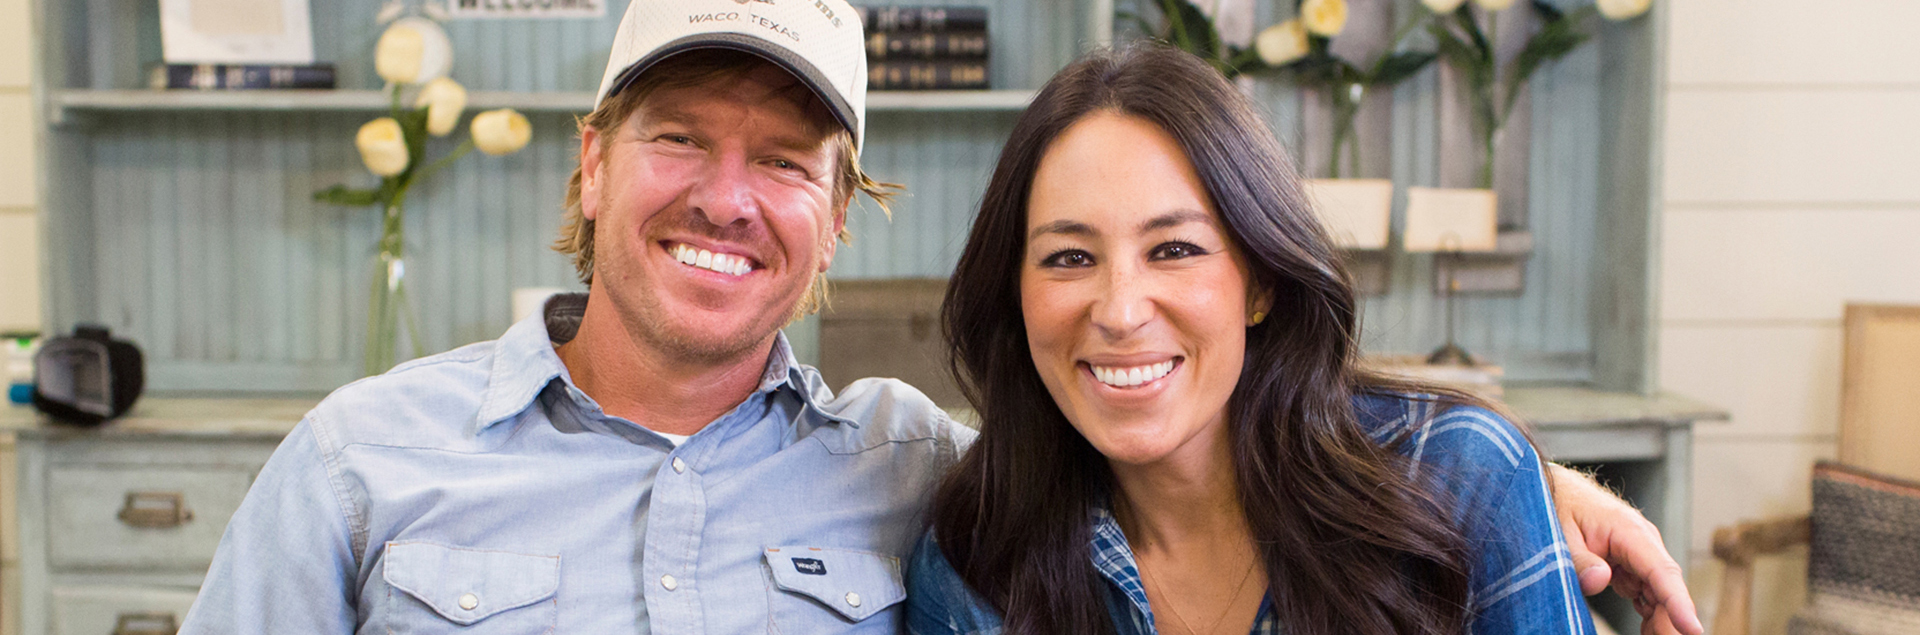 The Magnolia Appeal: Why We Love Chip and Joanna Gaines